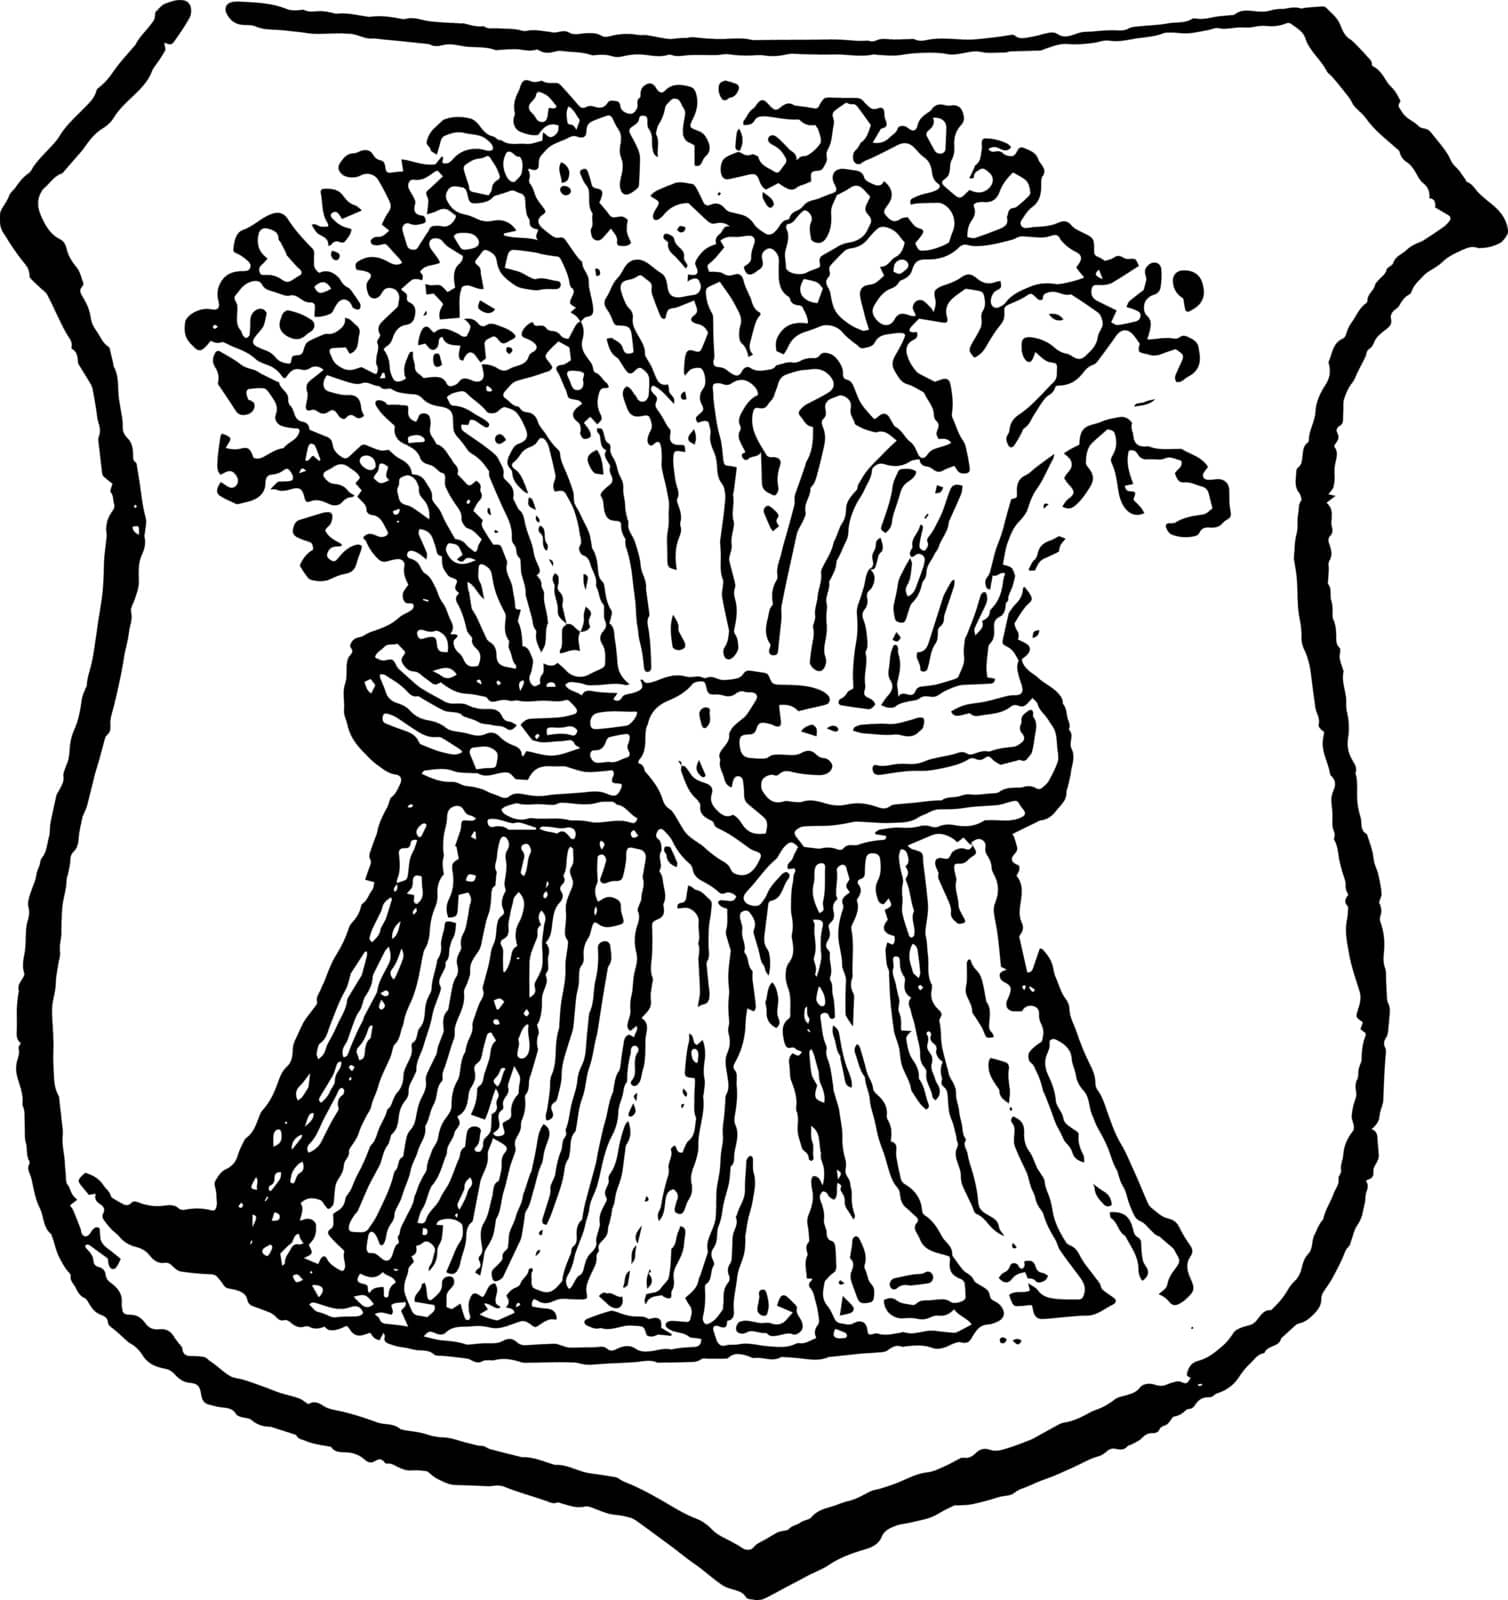 Garbe is a heraldic term for a sheaf of any kind of corn, vintag by Morphart